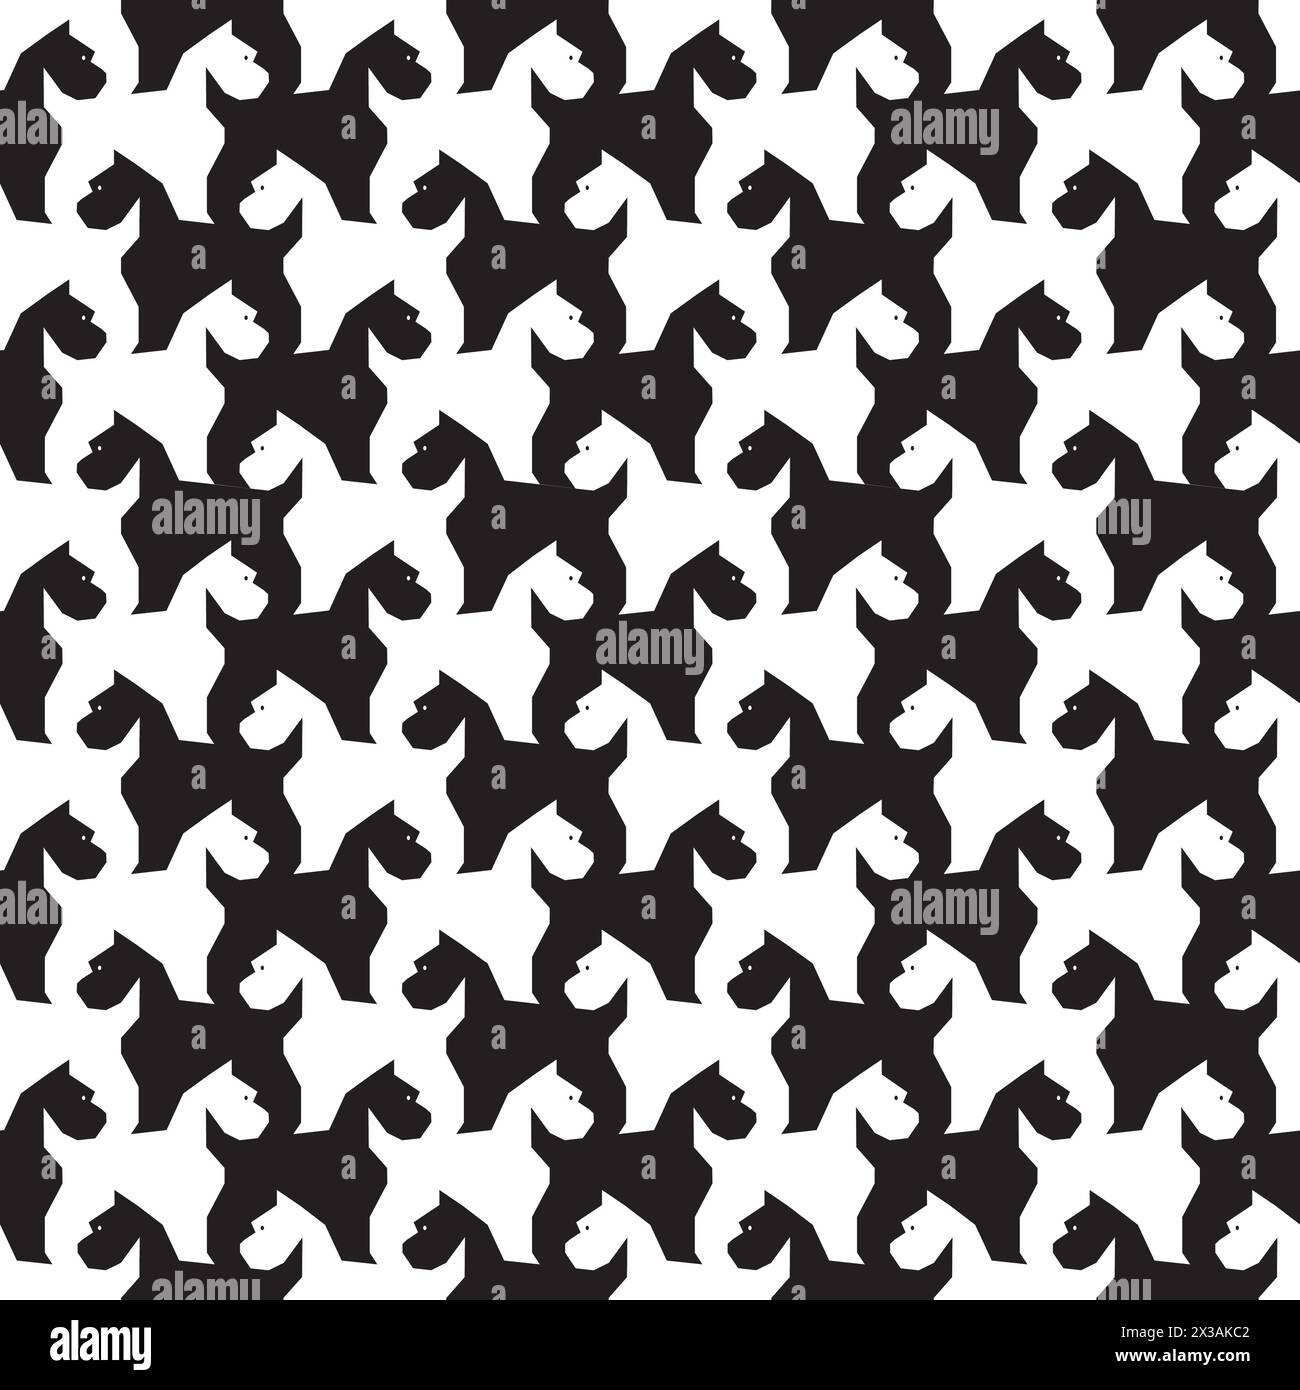 Abstract black and white terrier dog design pattern on repeat pattern Stock Vector